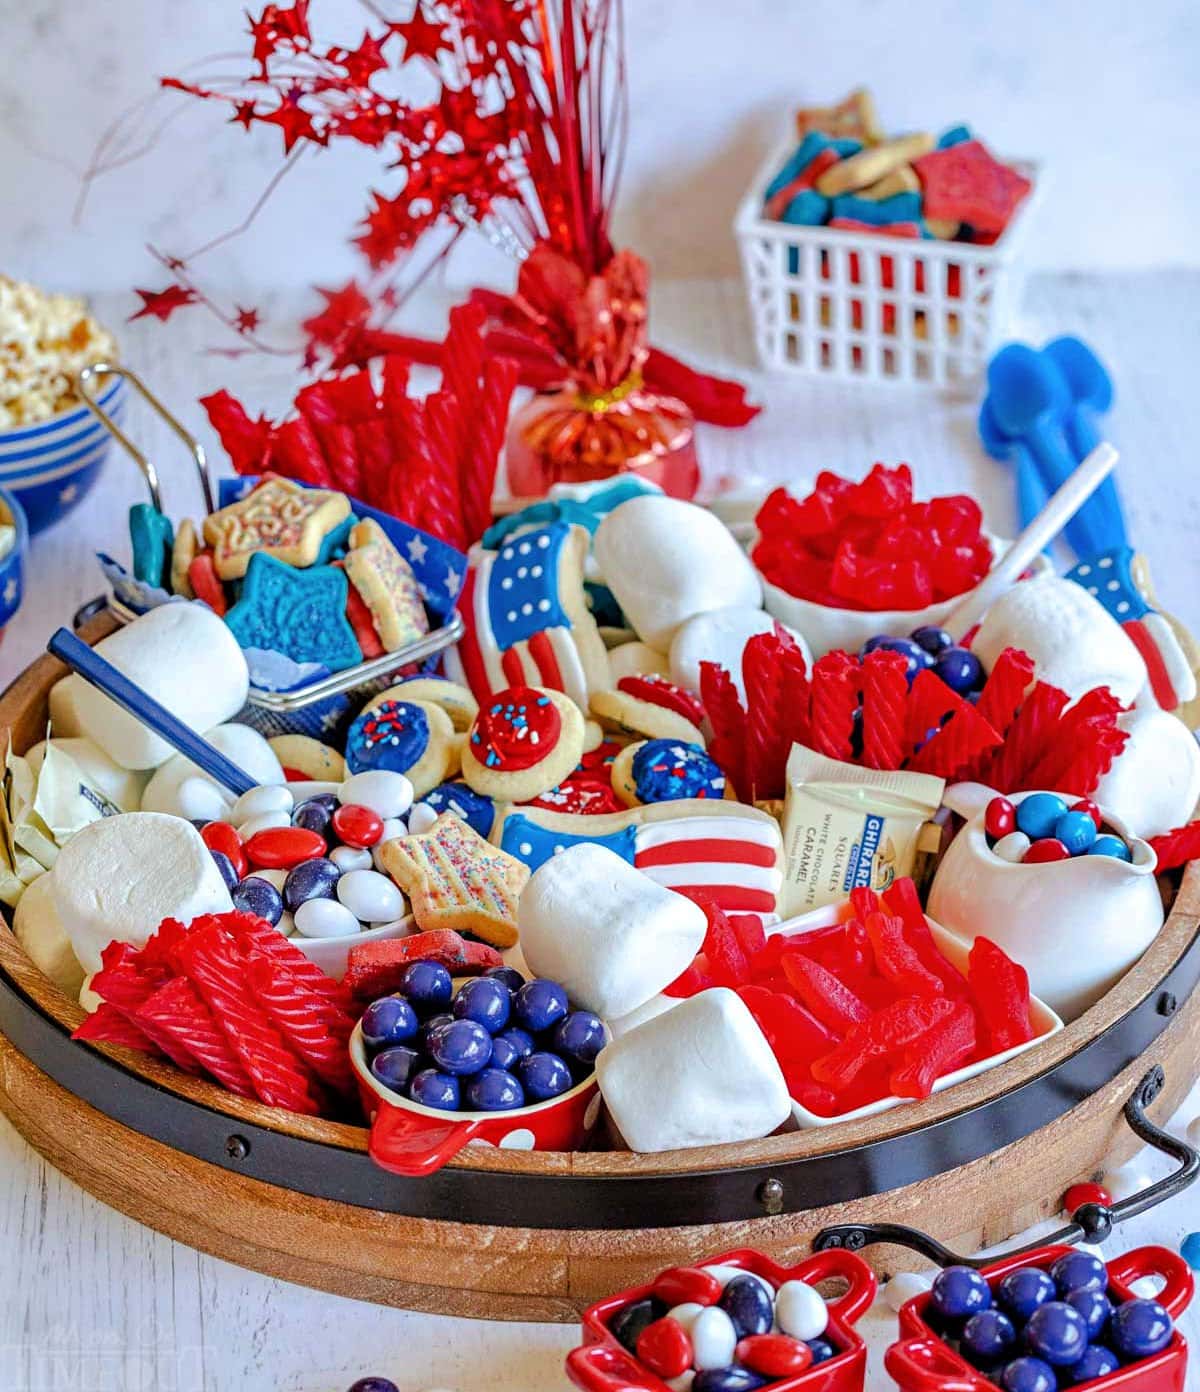 angled front view of round wood board with lots of red, white and blue treats for the holiday. marshmallows, cookies, and candies on the board.